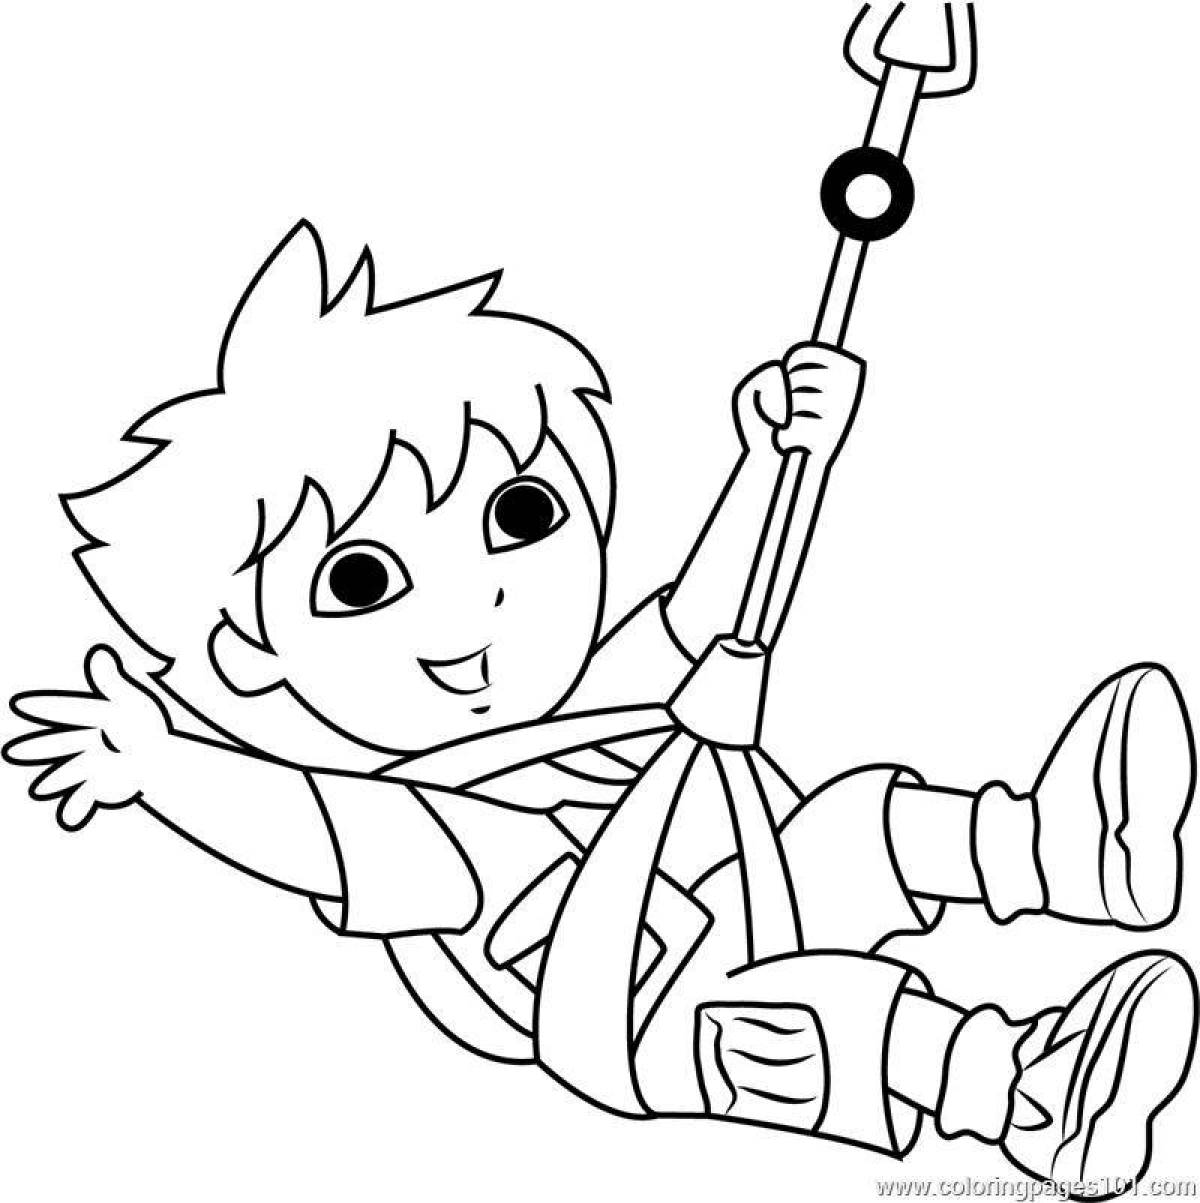 Diego go's fun coloring page